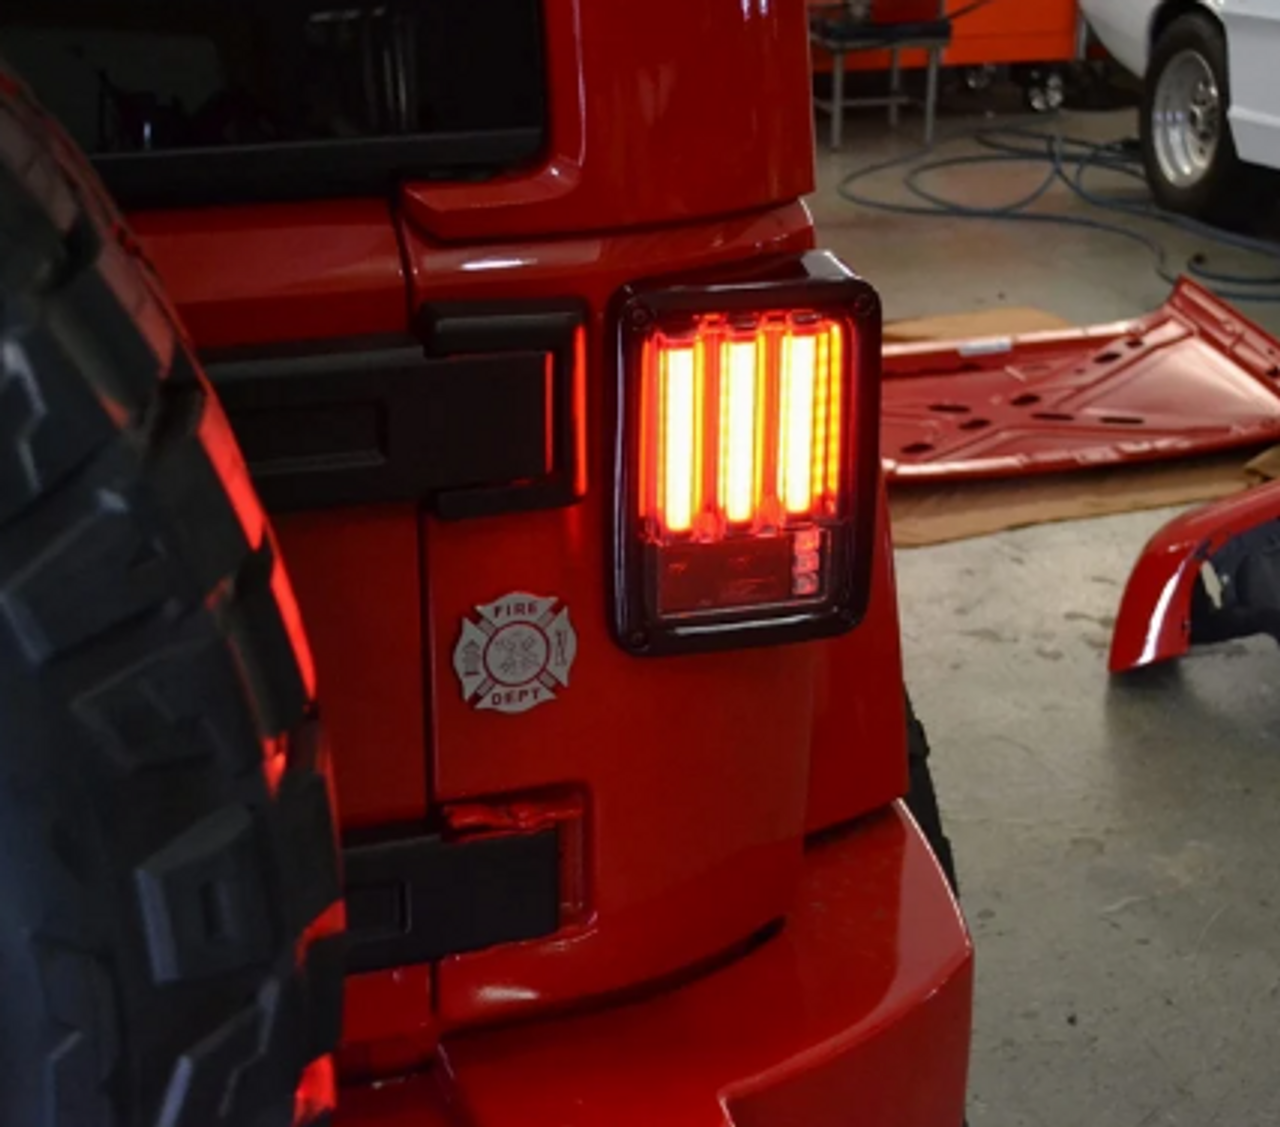 Recon 264234LEDRD Scanning LED Bar Style Tail Lights in Red for Jeep Wrangler JK 2007-2018